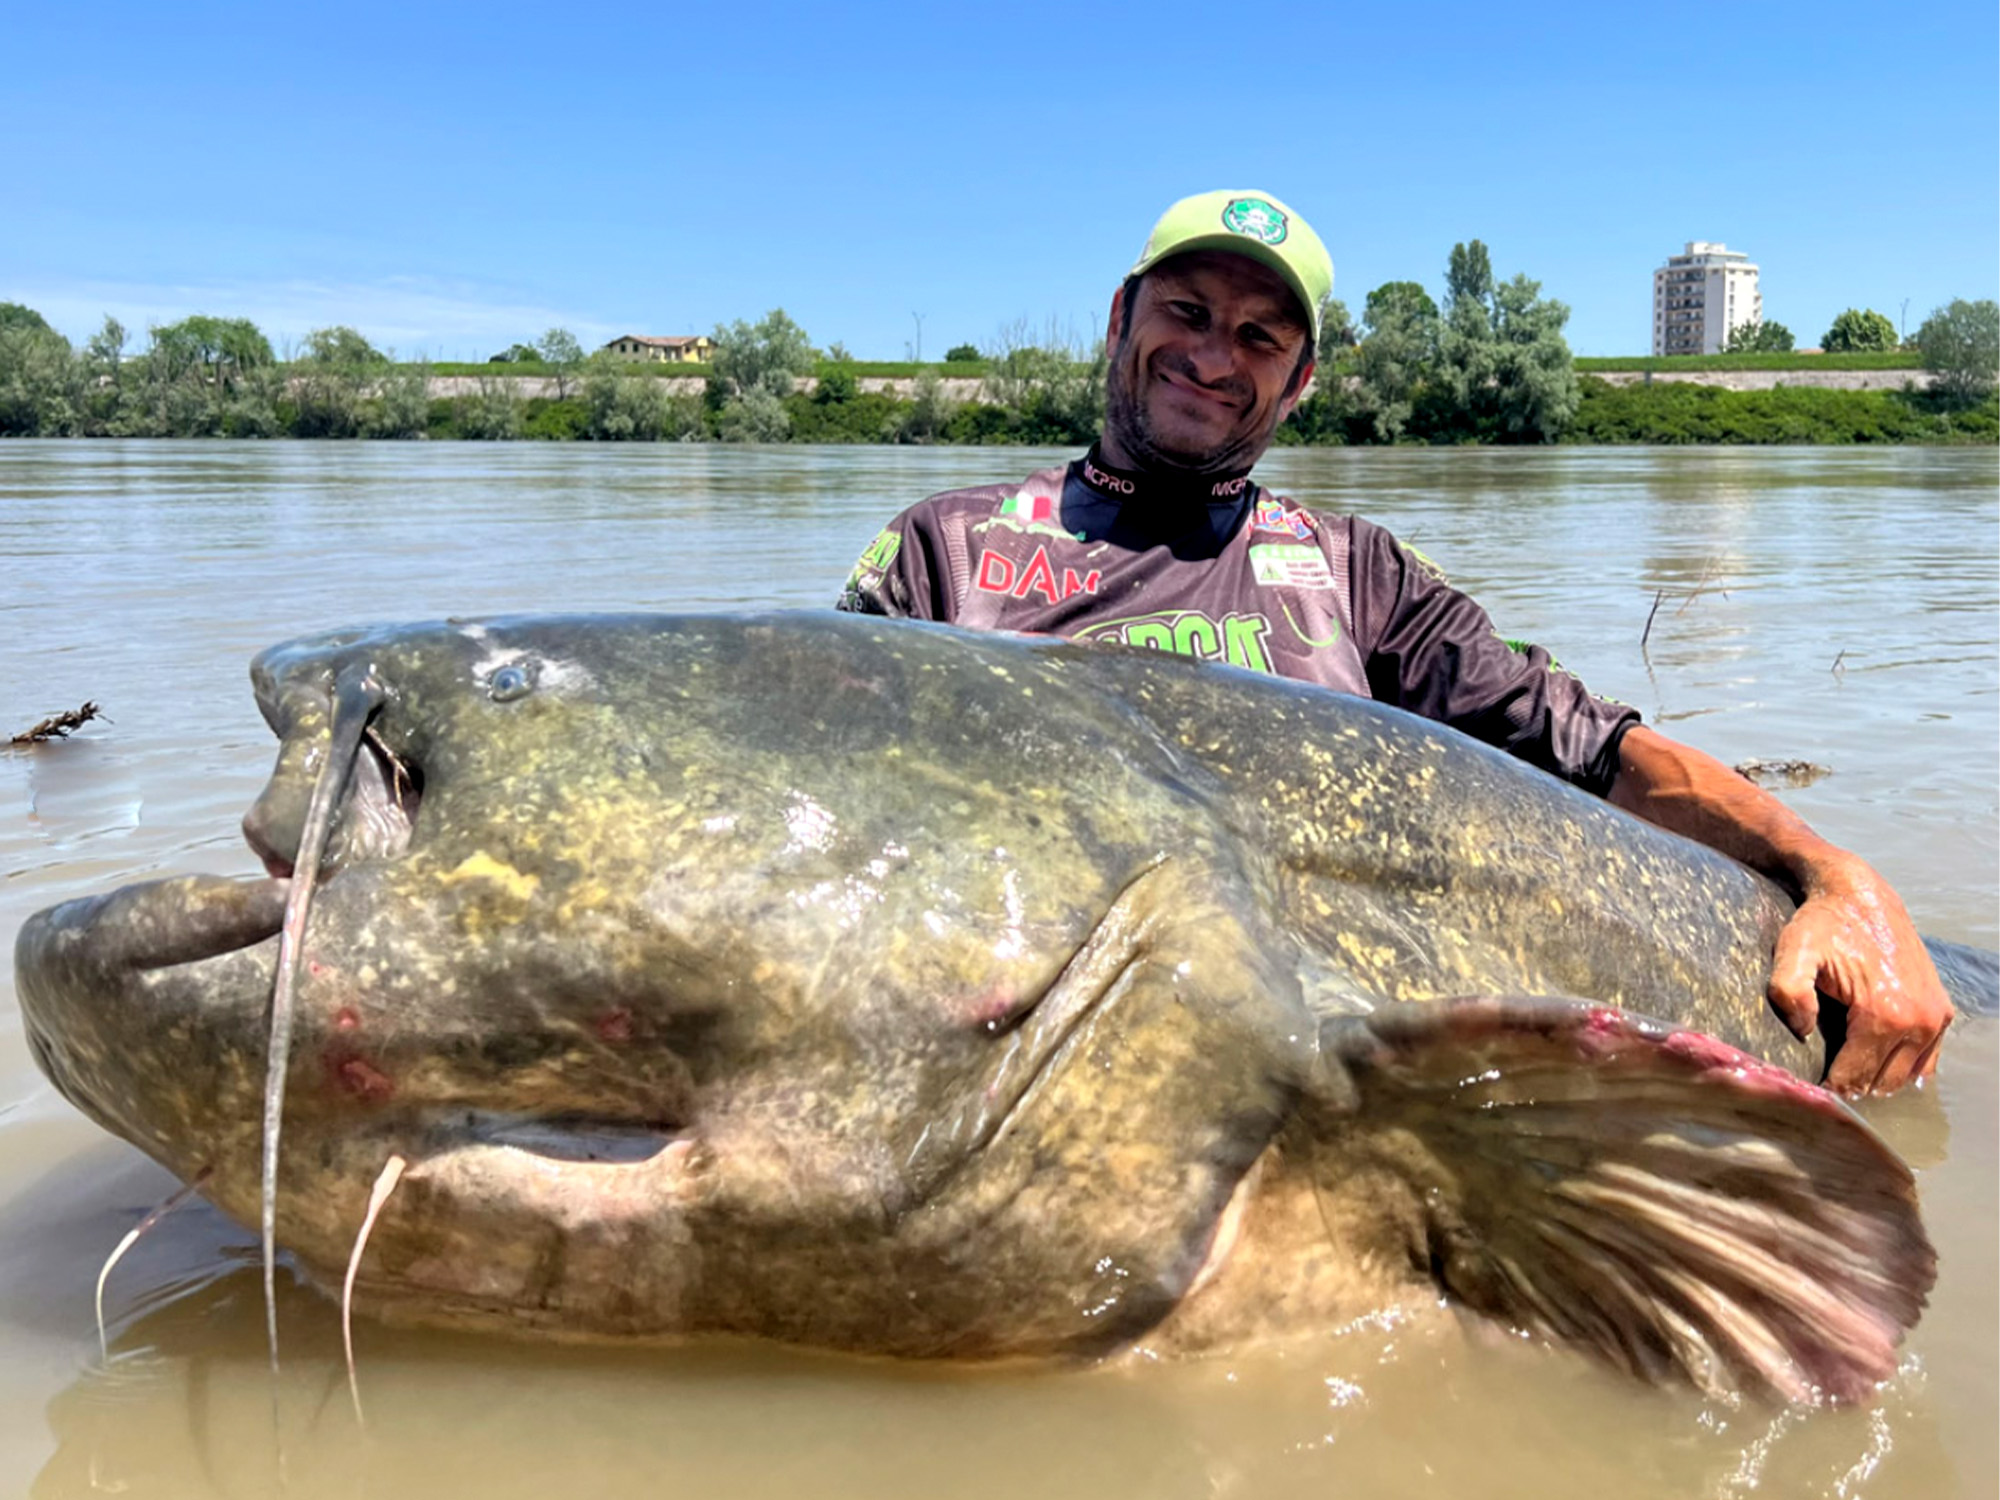 Alessandro Biancardi with the pending world-record Wels catfish.